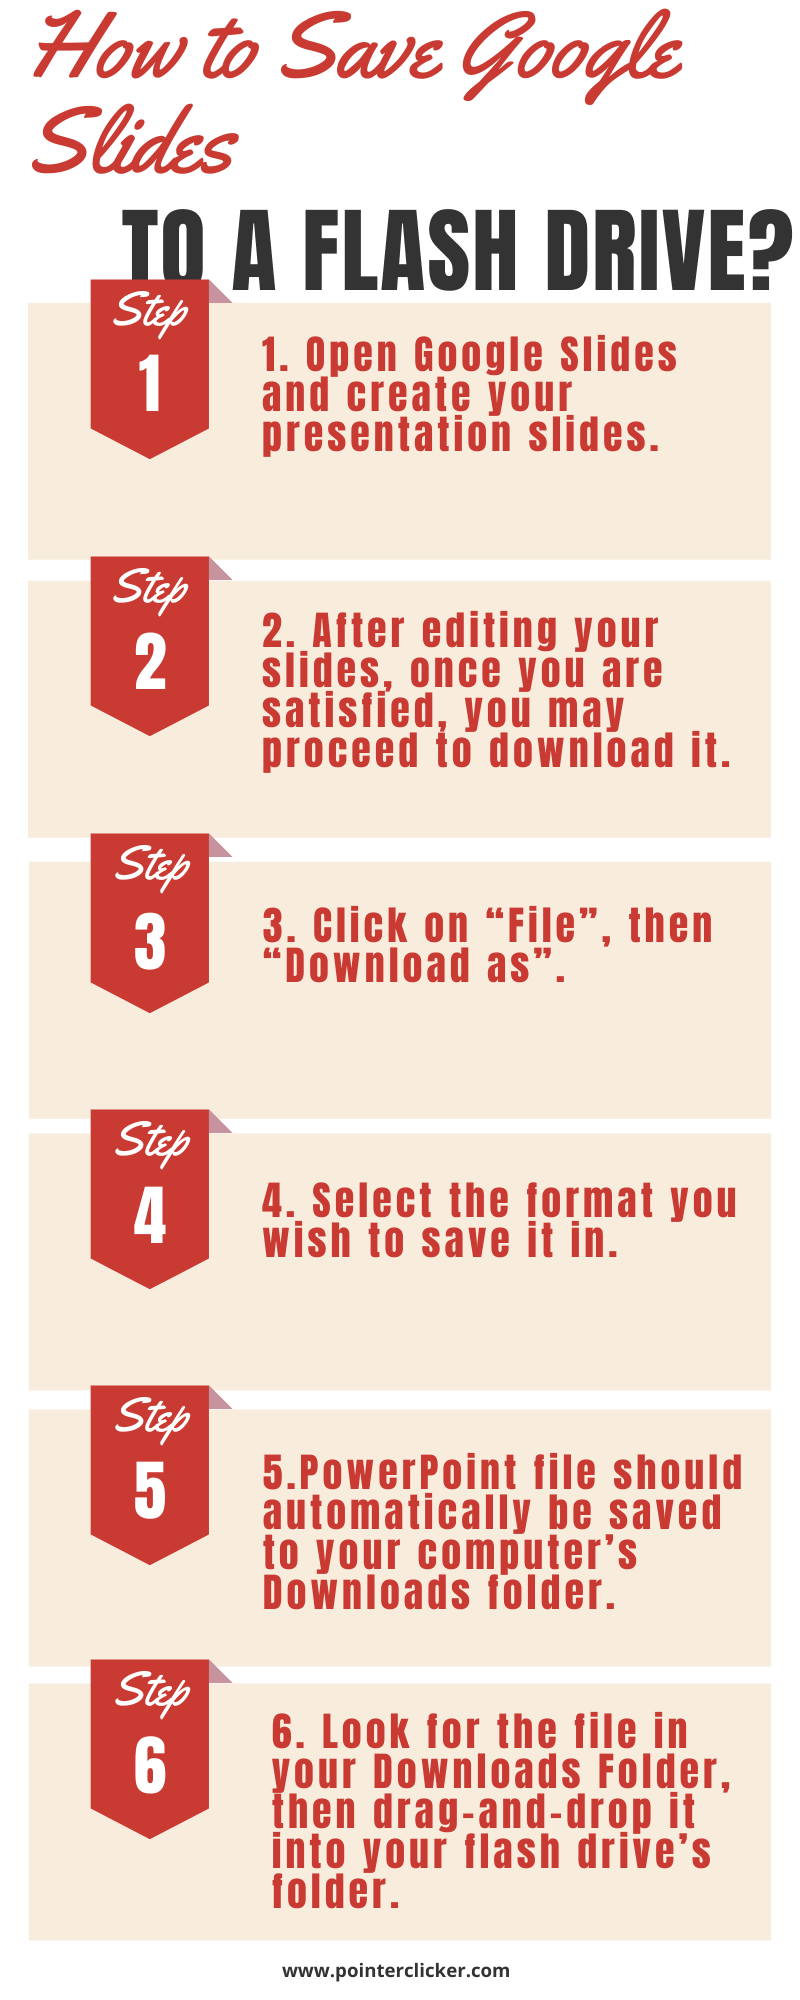 an infographic about how to save a google slide into a flash drive